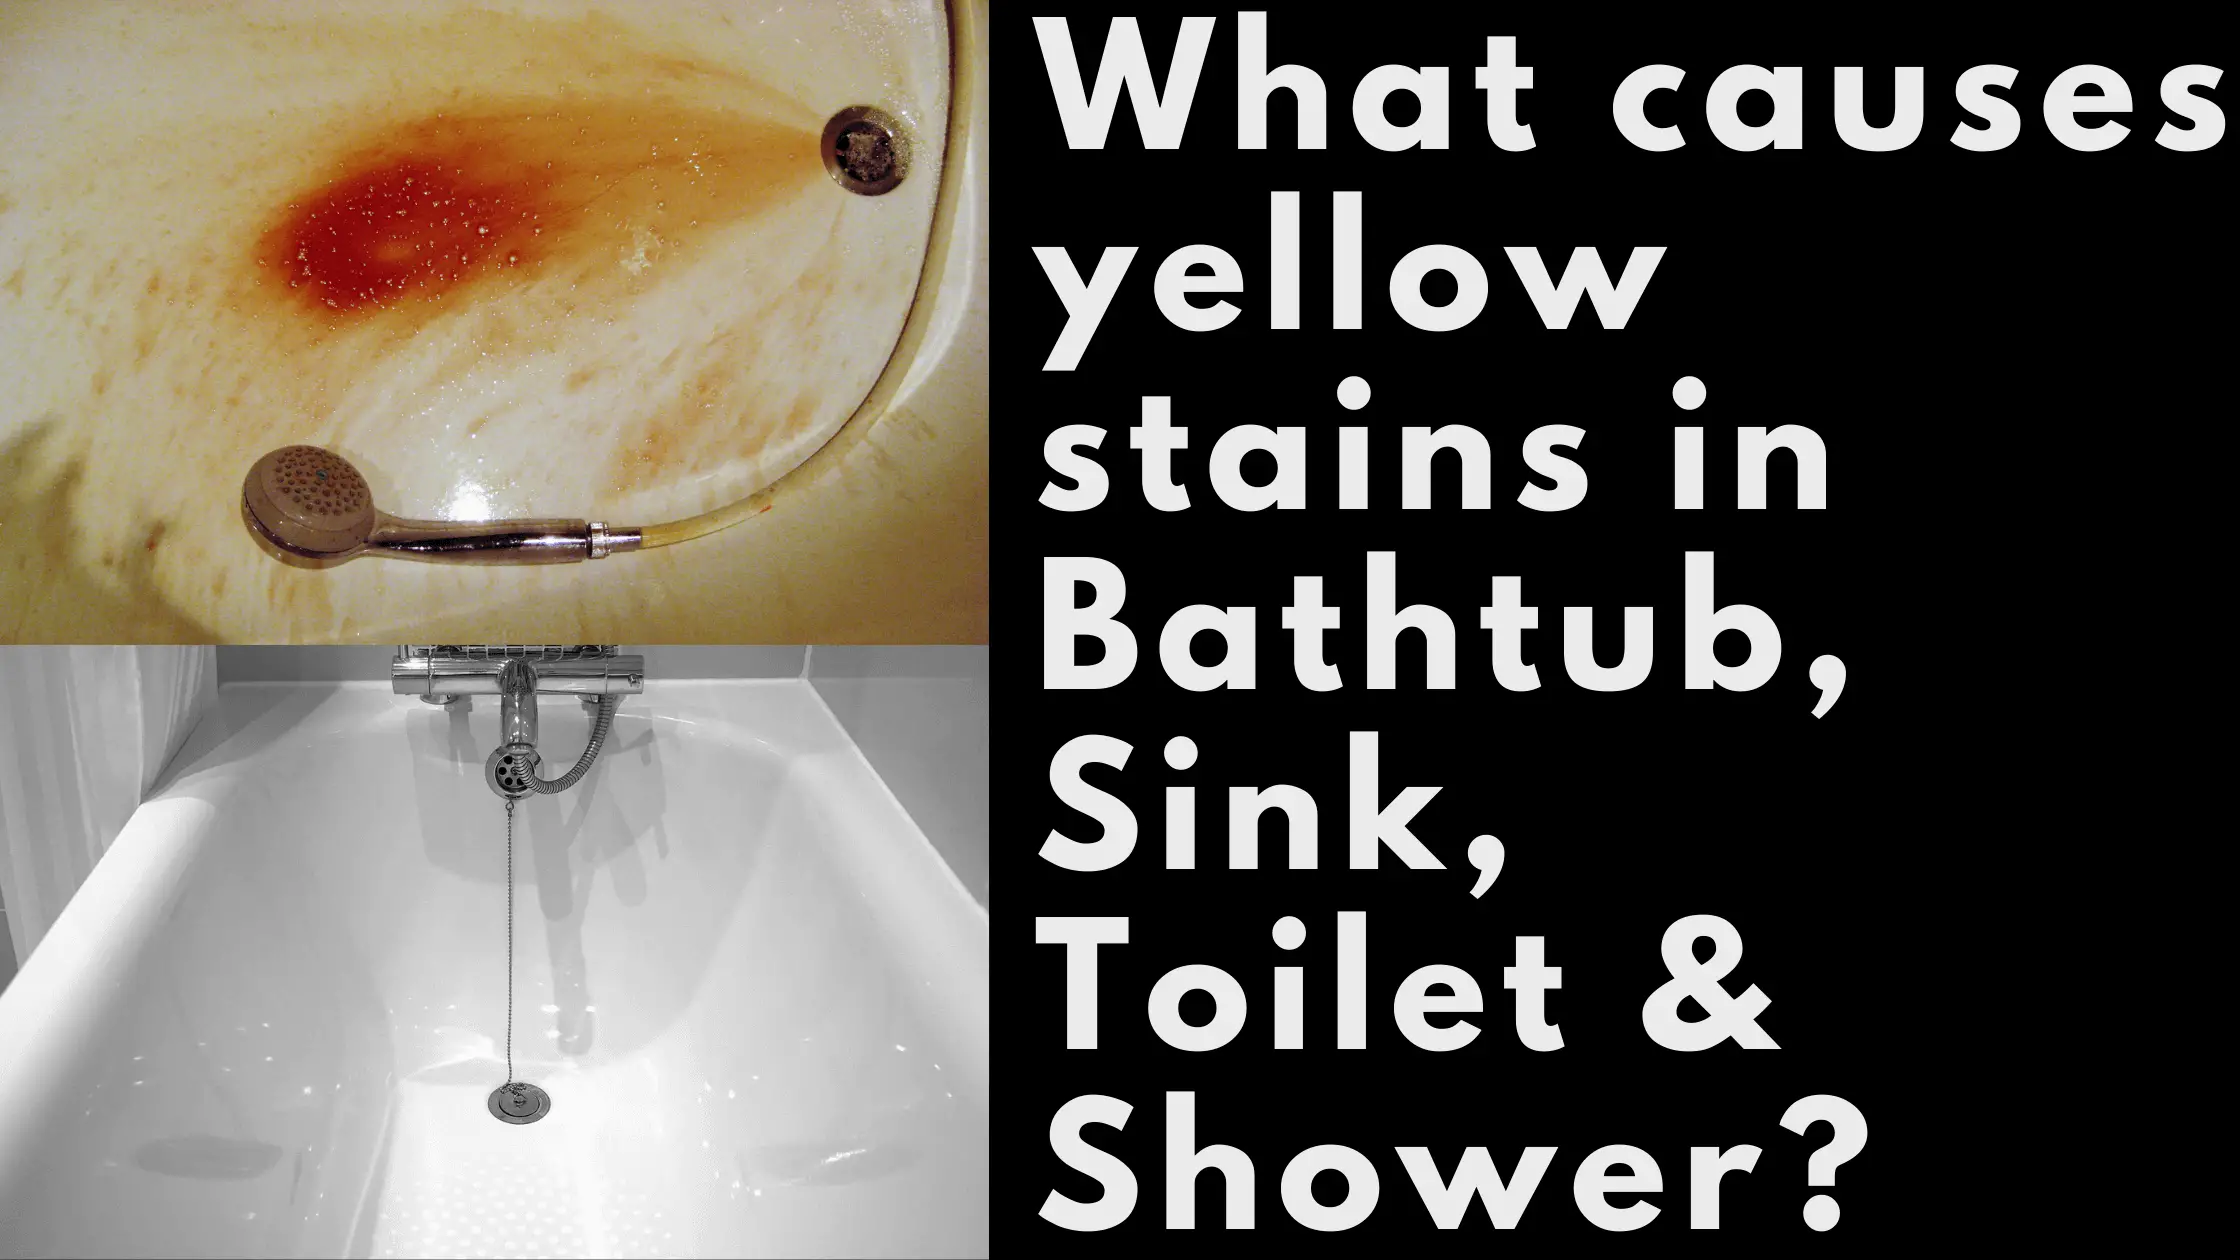 What Causes Yellow Stains in Bathtub, Sink, Toilet & Shower